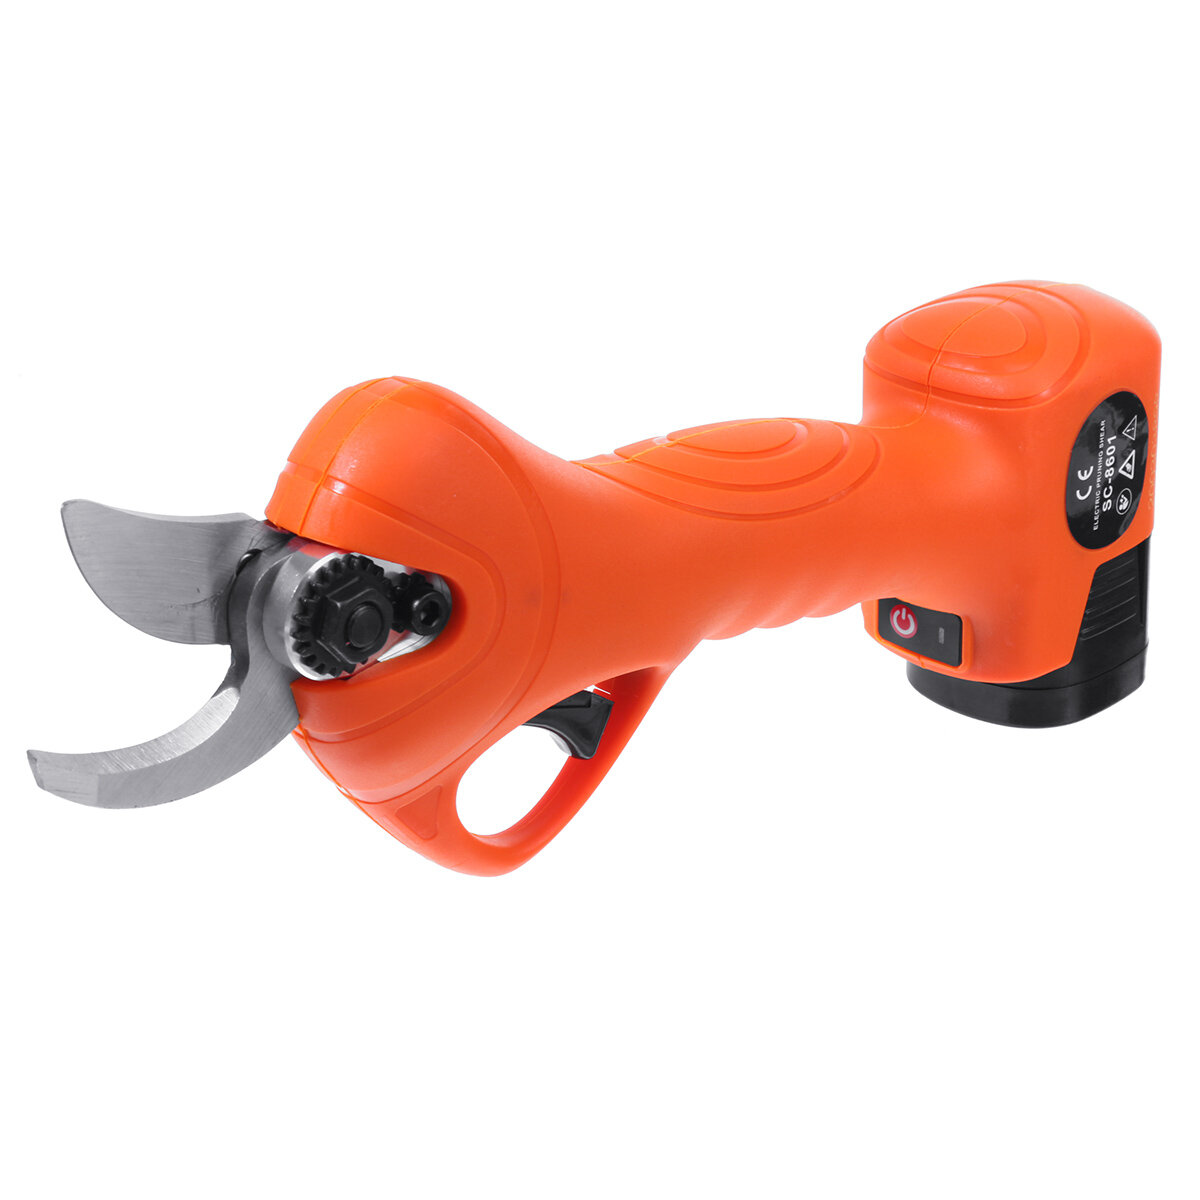 

16.8V 2000mAh 600W Electric Cutter Pruning Shears Cordless Branch Grafting Scissor Tool with 2 Battery